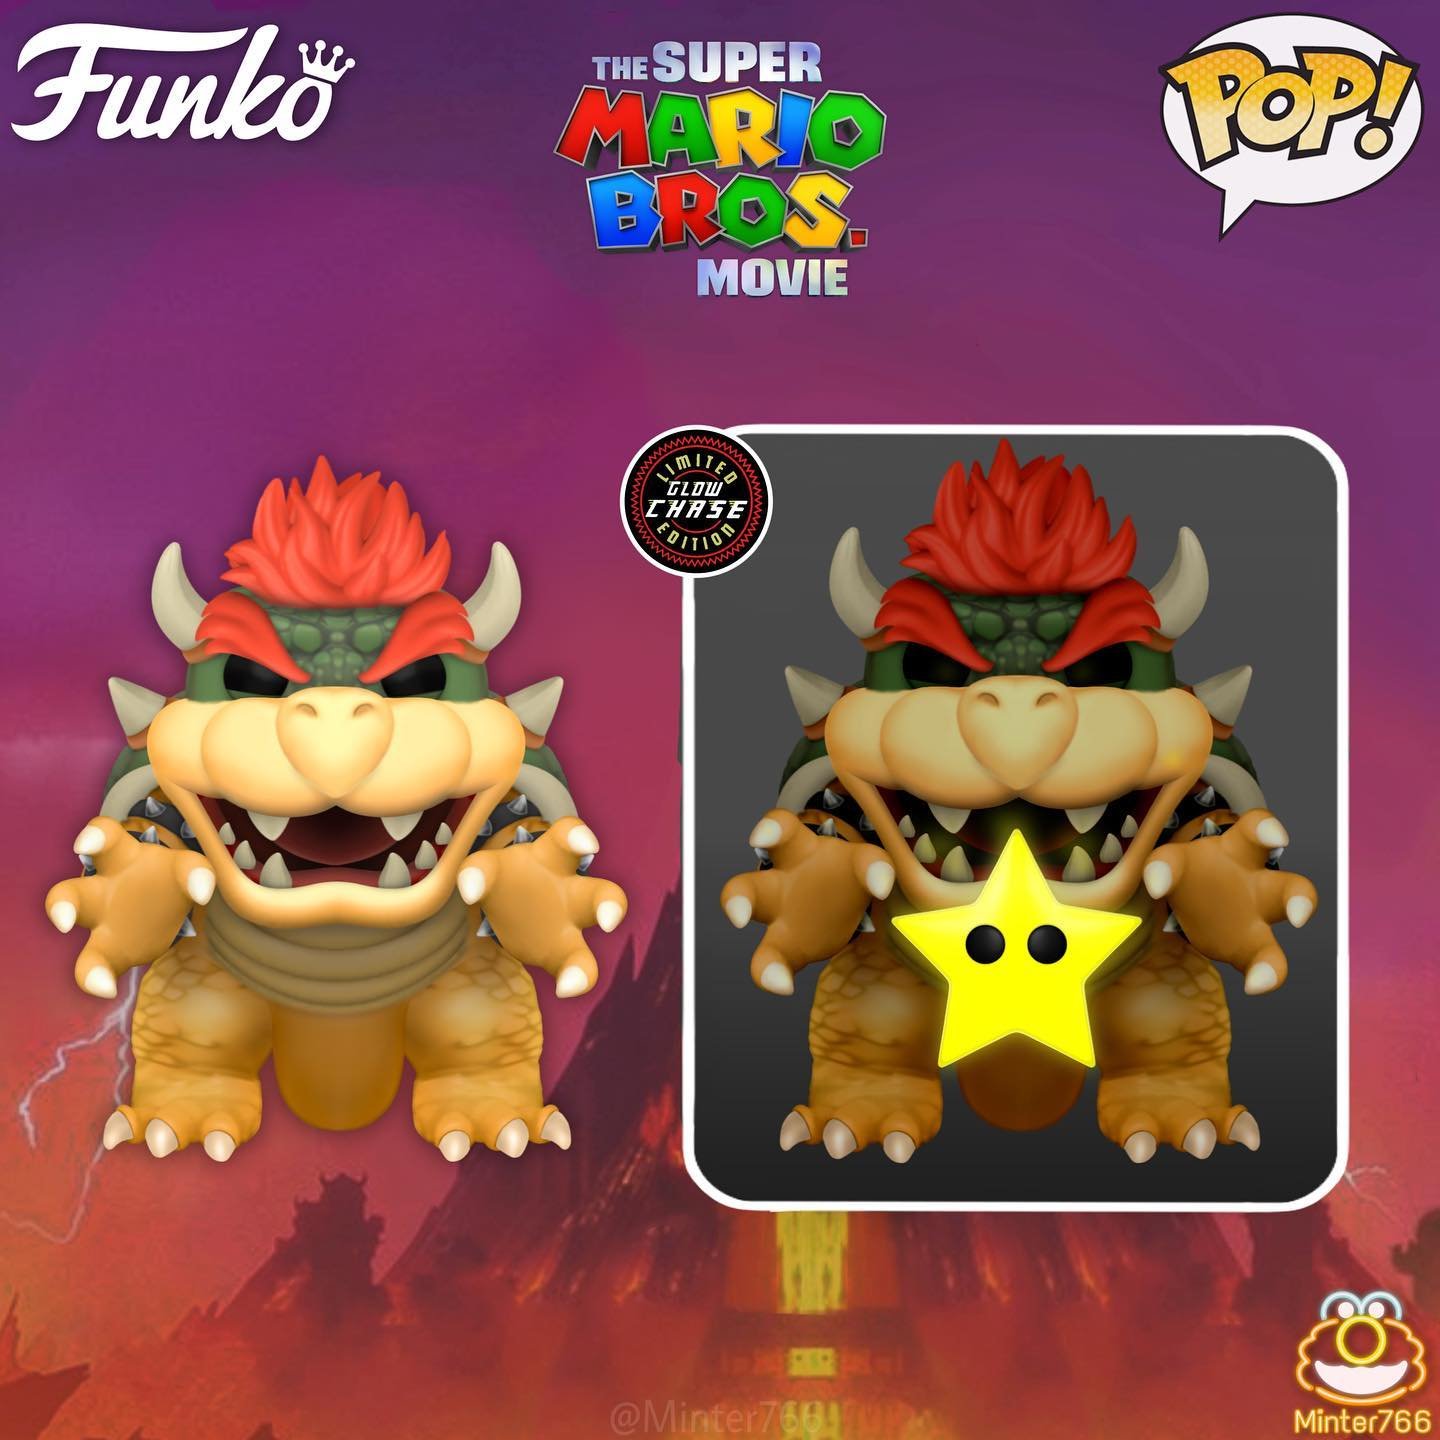 dekorere Fare svejsning Funko Finderz on Twitter: "These are just concepts but just imagine the  chaos that would unfold if Funko announced Super Mario Pop! figures.  Credit: https://t.co/aRda0sr15F #MAR10 #Funko #FunkoPop #FunkoPopVinyl #Pop  #PopVinyl #Collectibles #